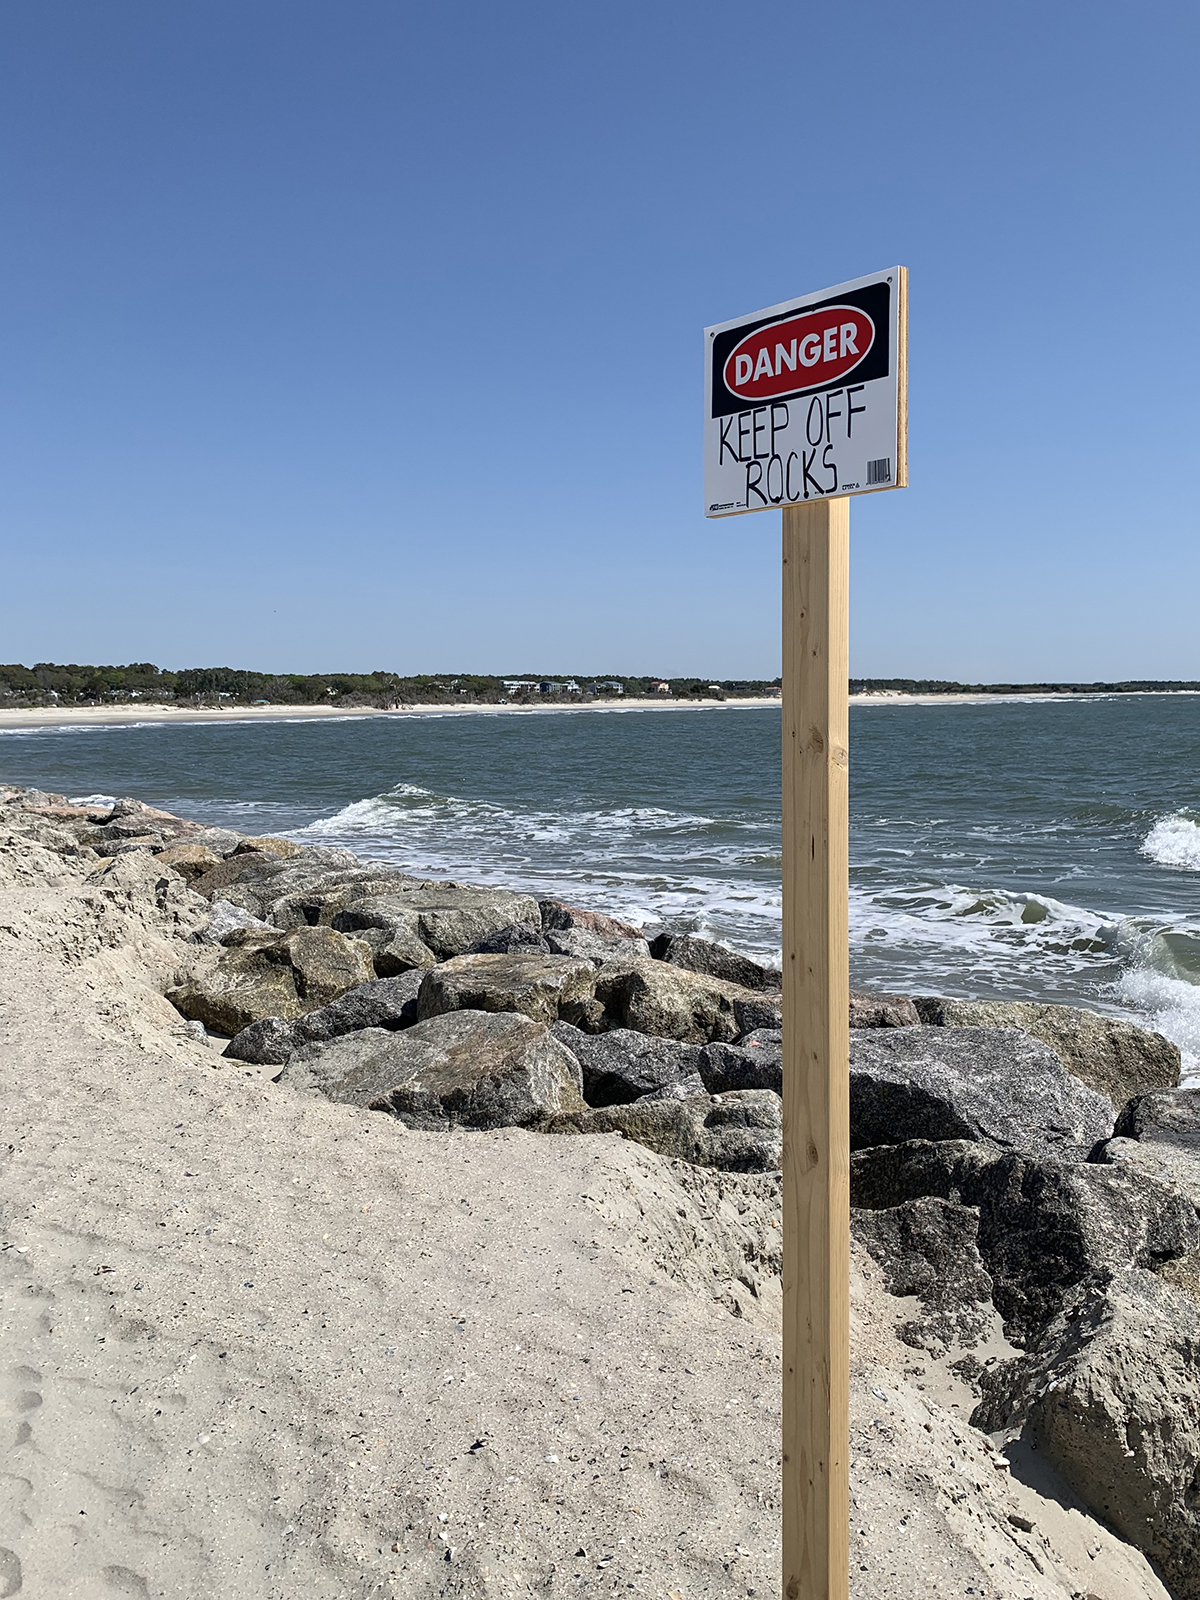 A hand-lettered signs warns beachgoers to stay off the rock portion of the structure. Photo: Trista Talton